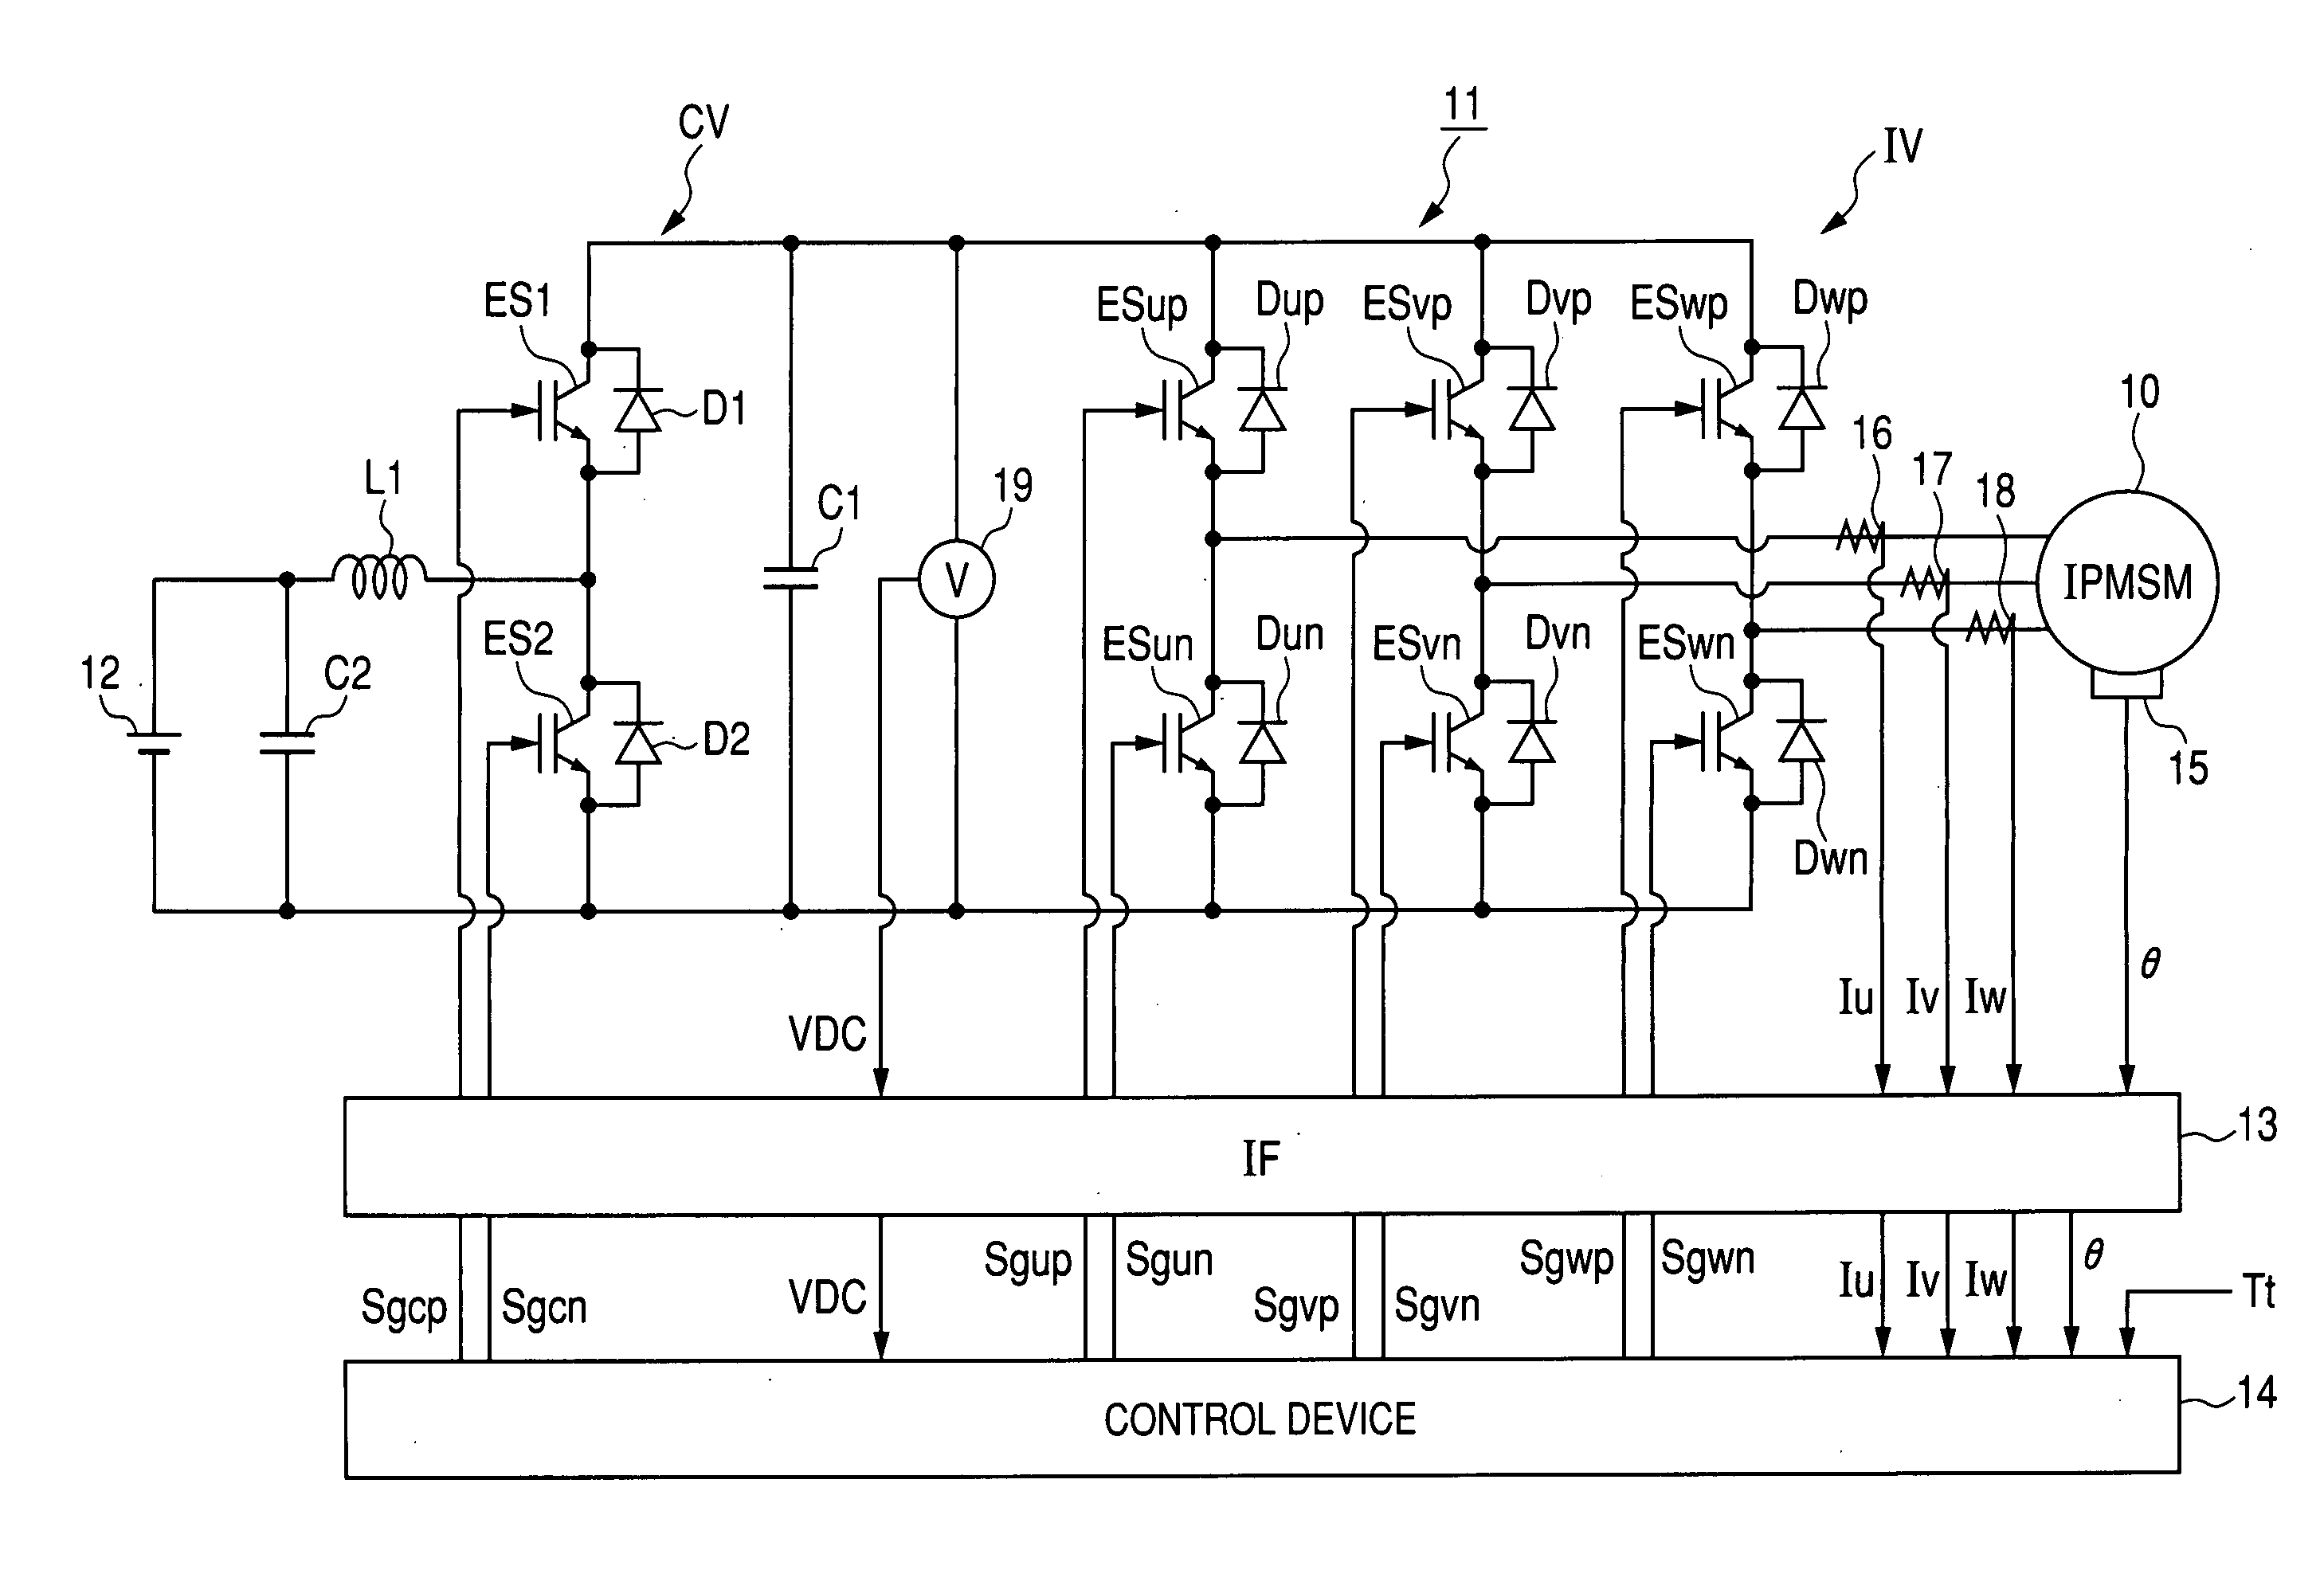 Control device for electric rotating machine and method of controlling the machine